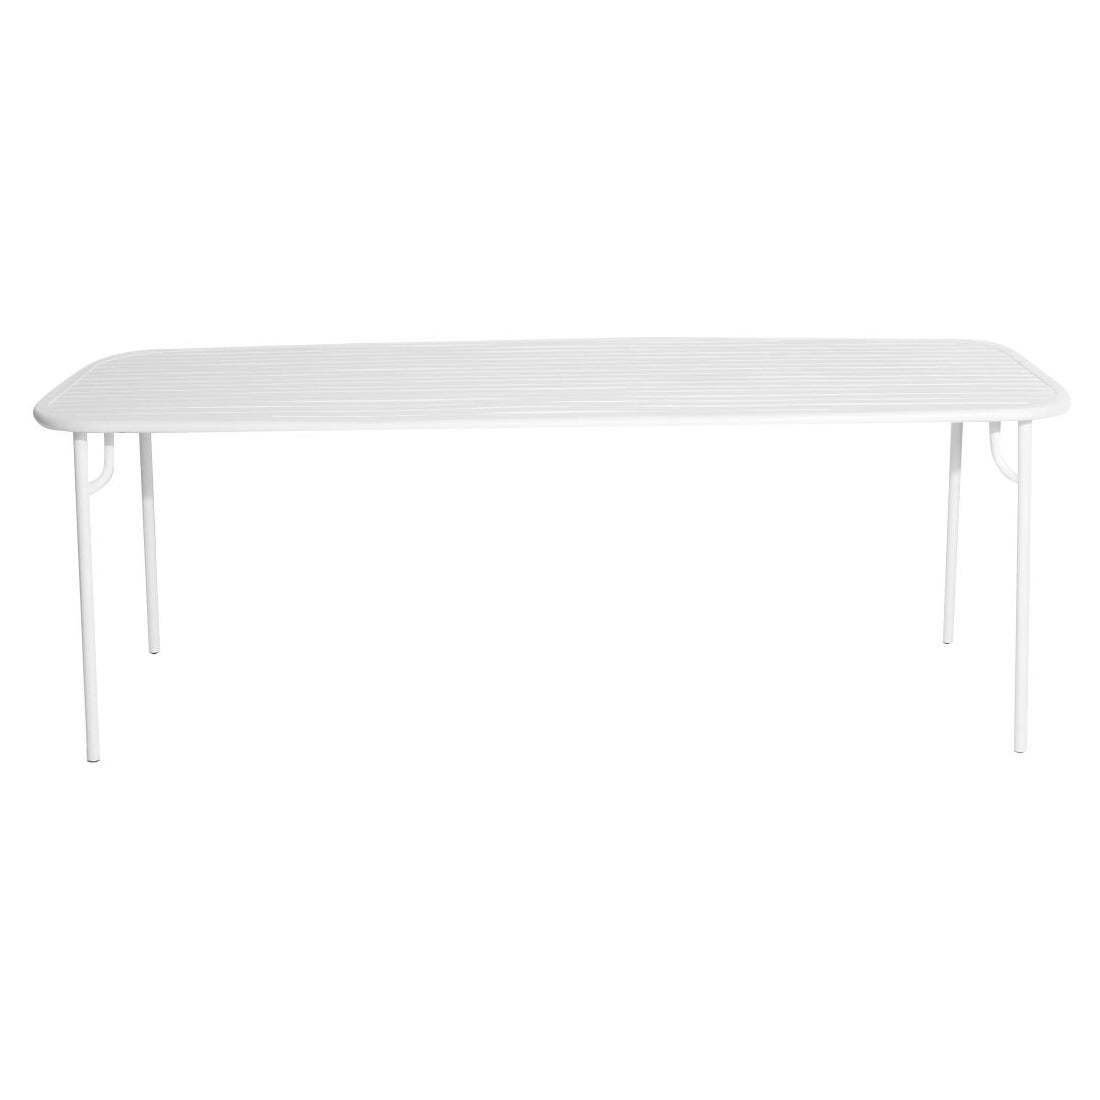 Petite Friture Week-End Large Rectangular Dining Table in White with Slats For Sale